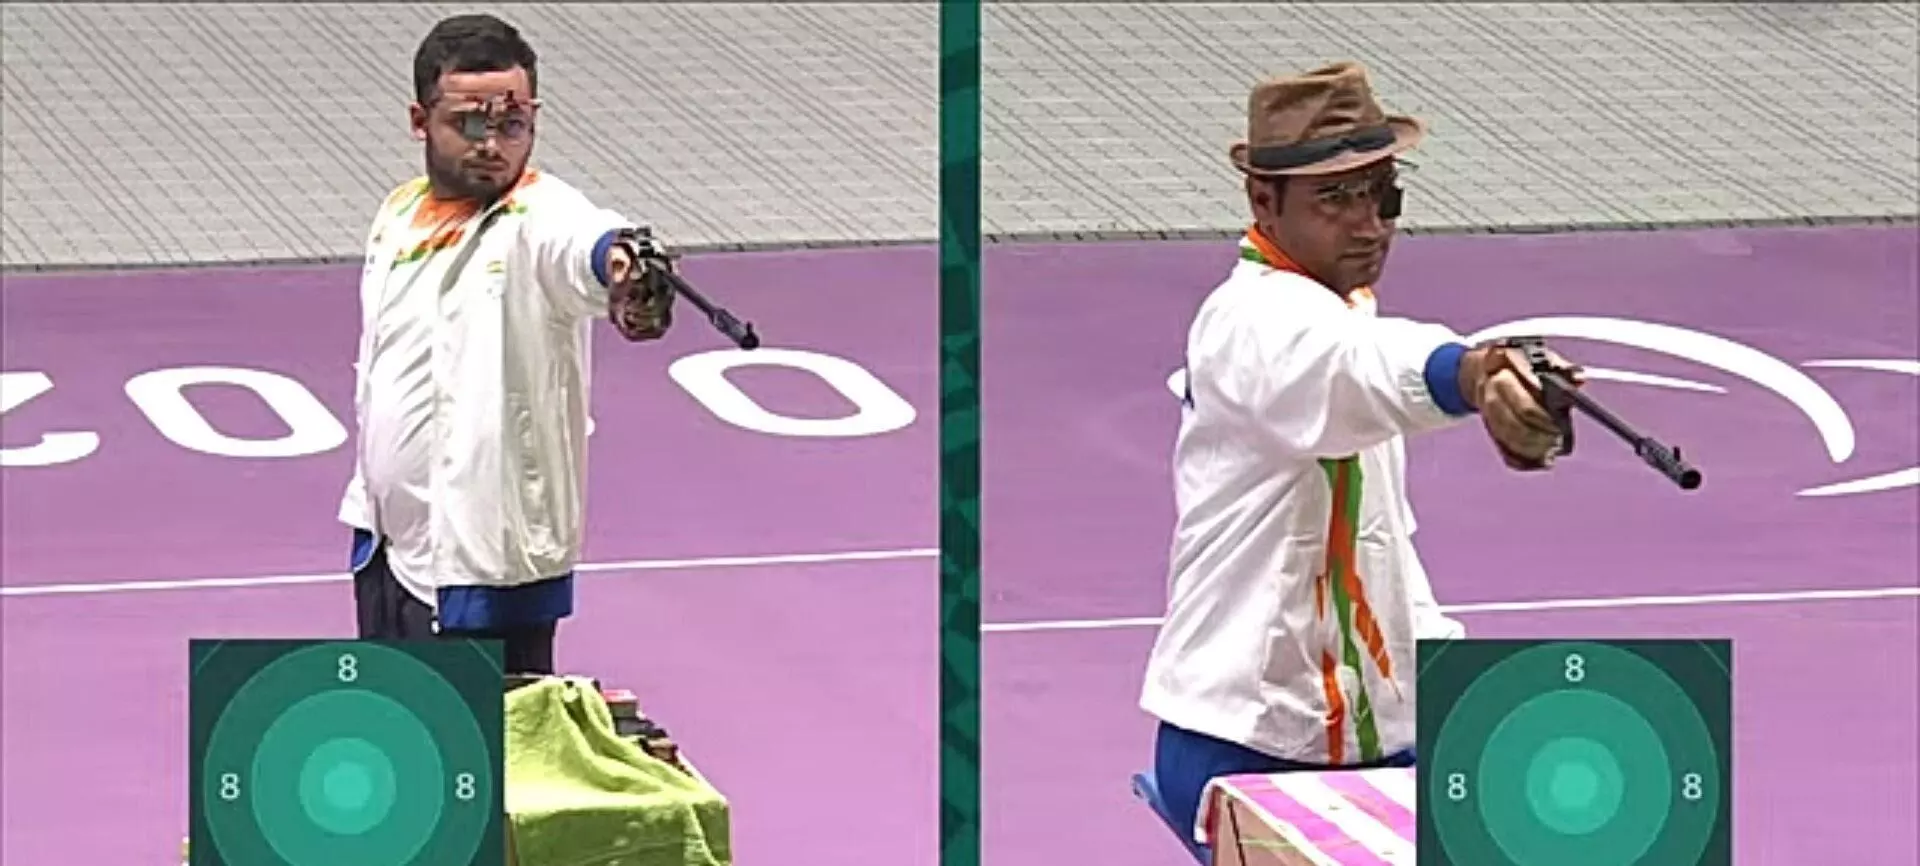 Paralympics Shooting: Indias Manish clinches gold, Singhraj bags silver